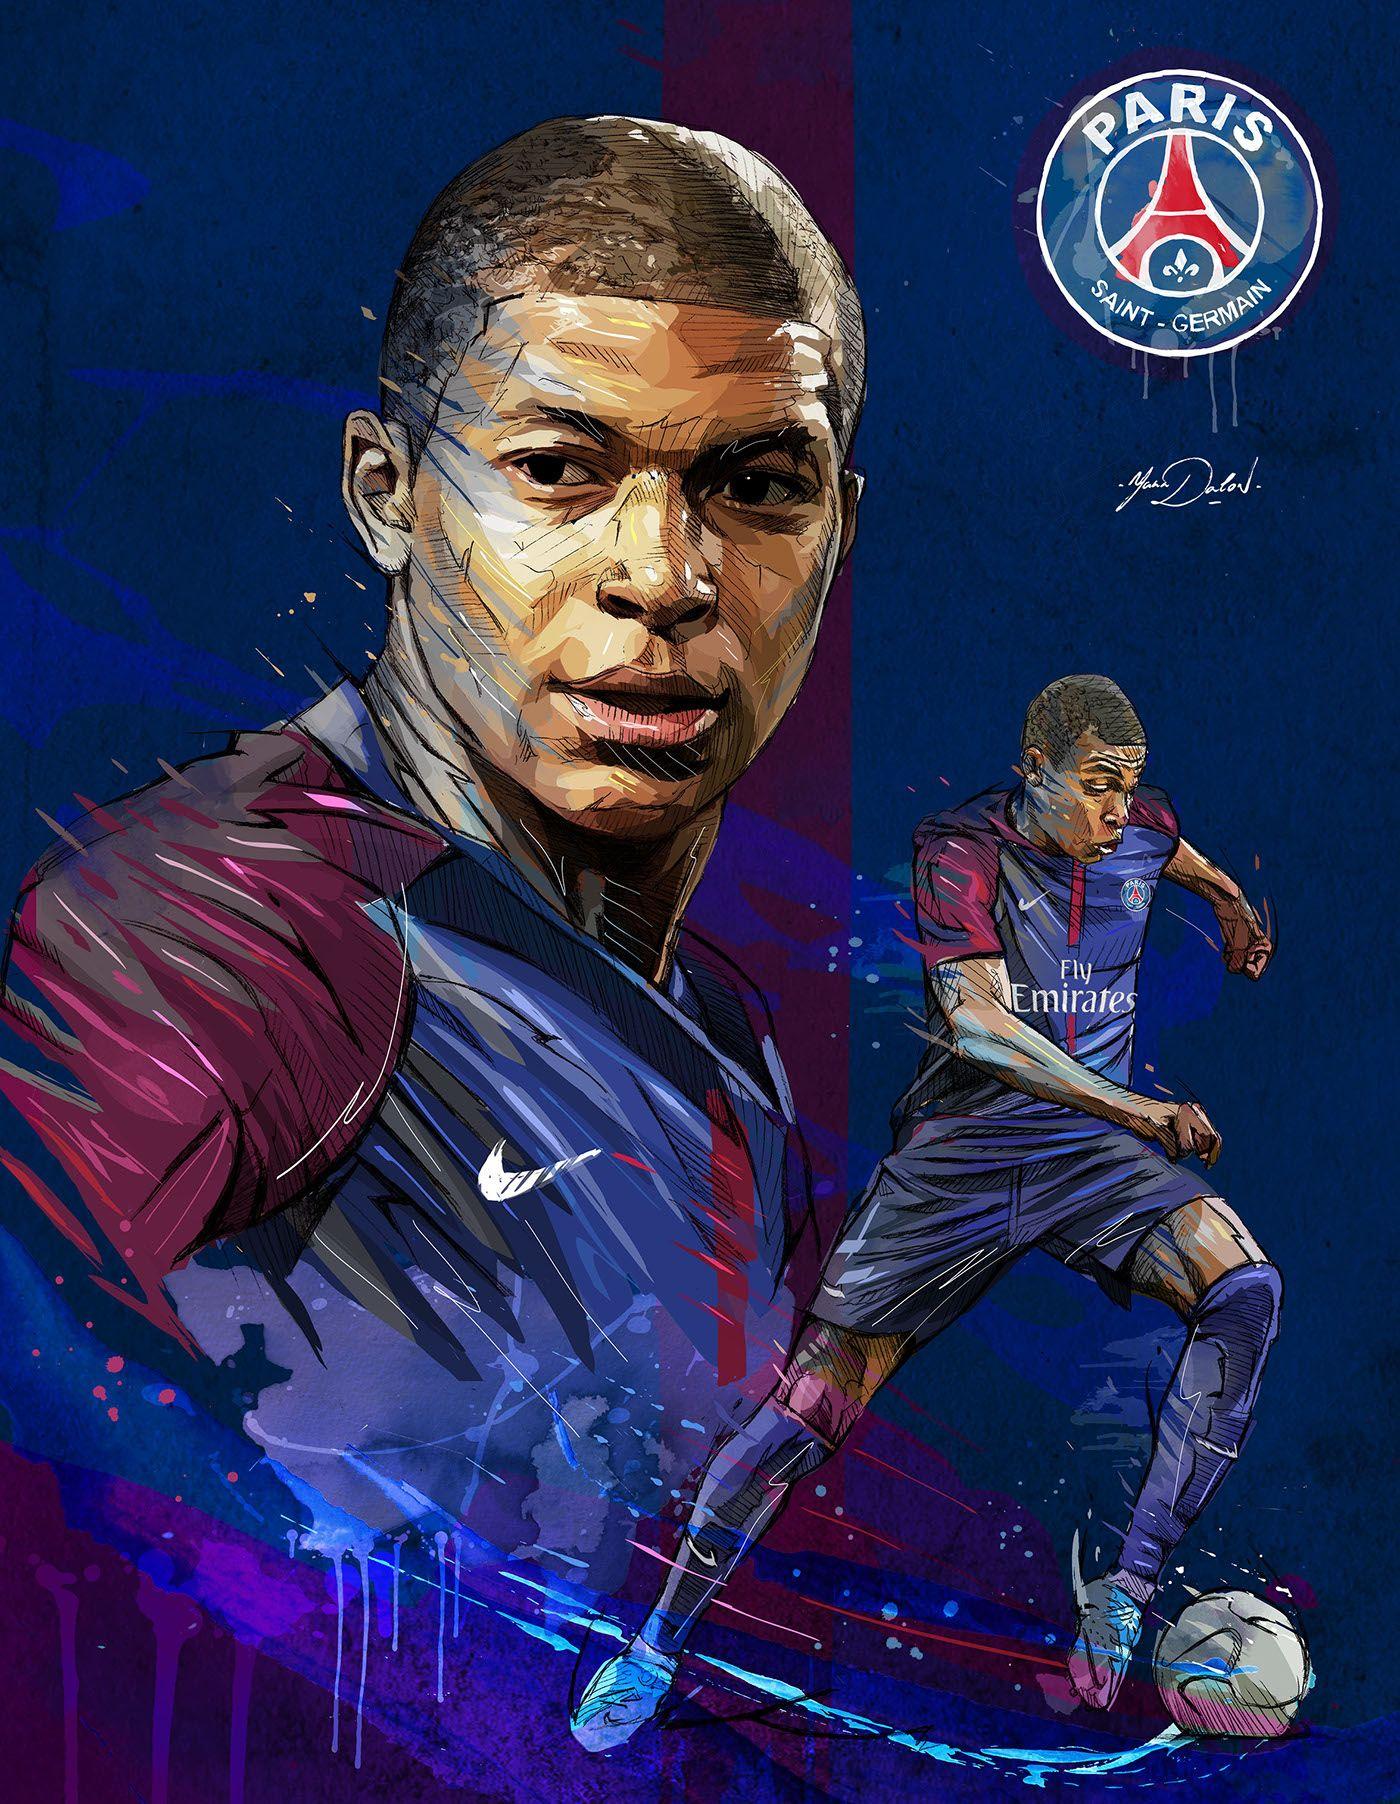 Free download My painting of Kylian Mbapp young soccer player